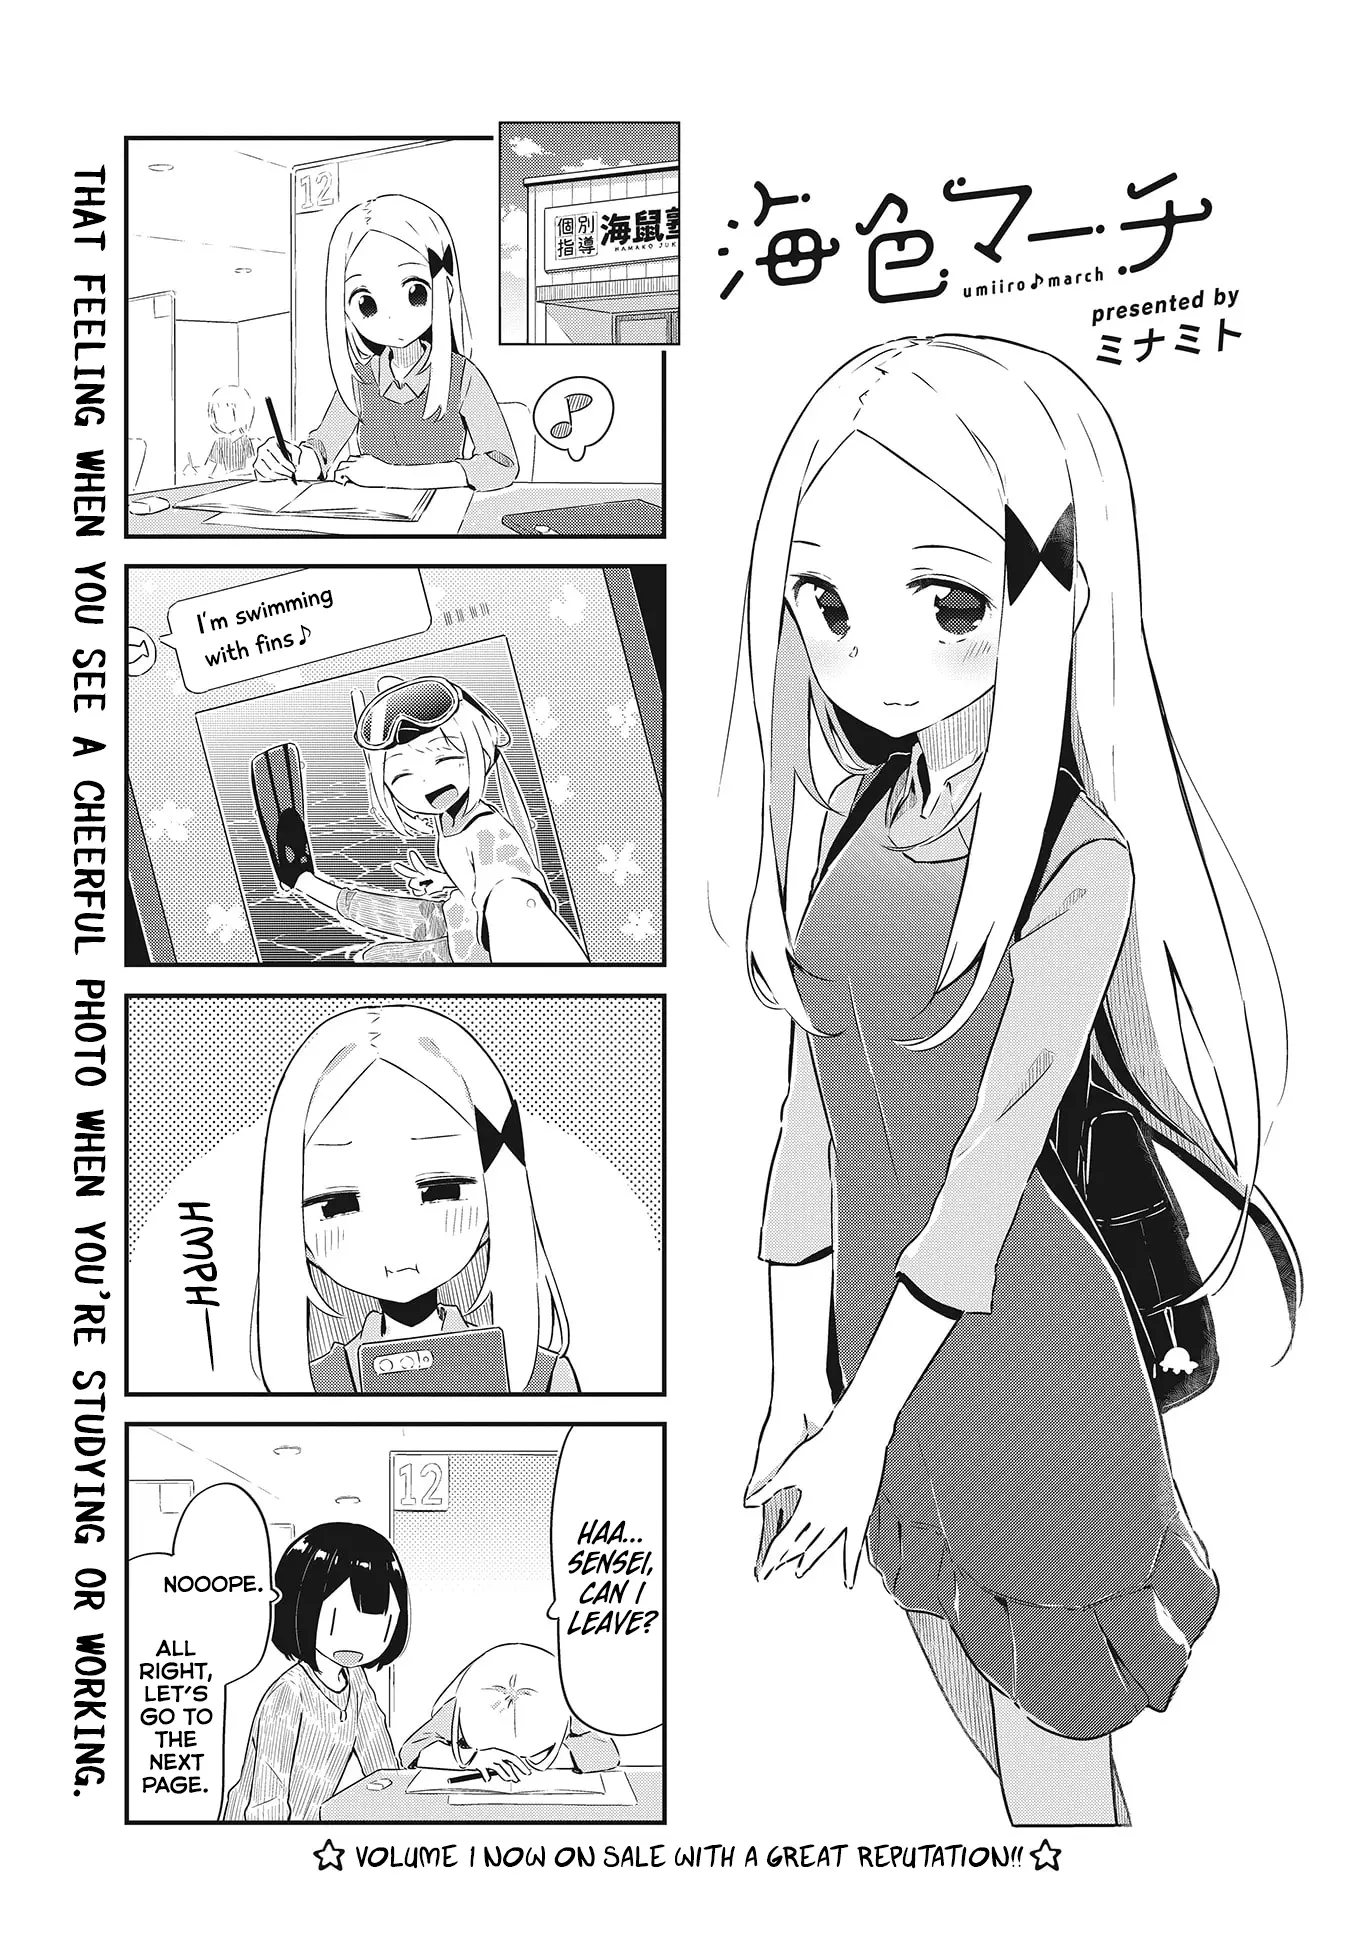 Umiiro March - 20 page 2